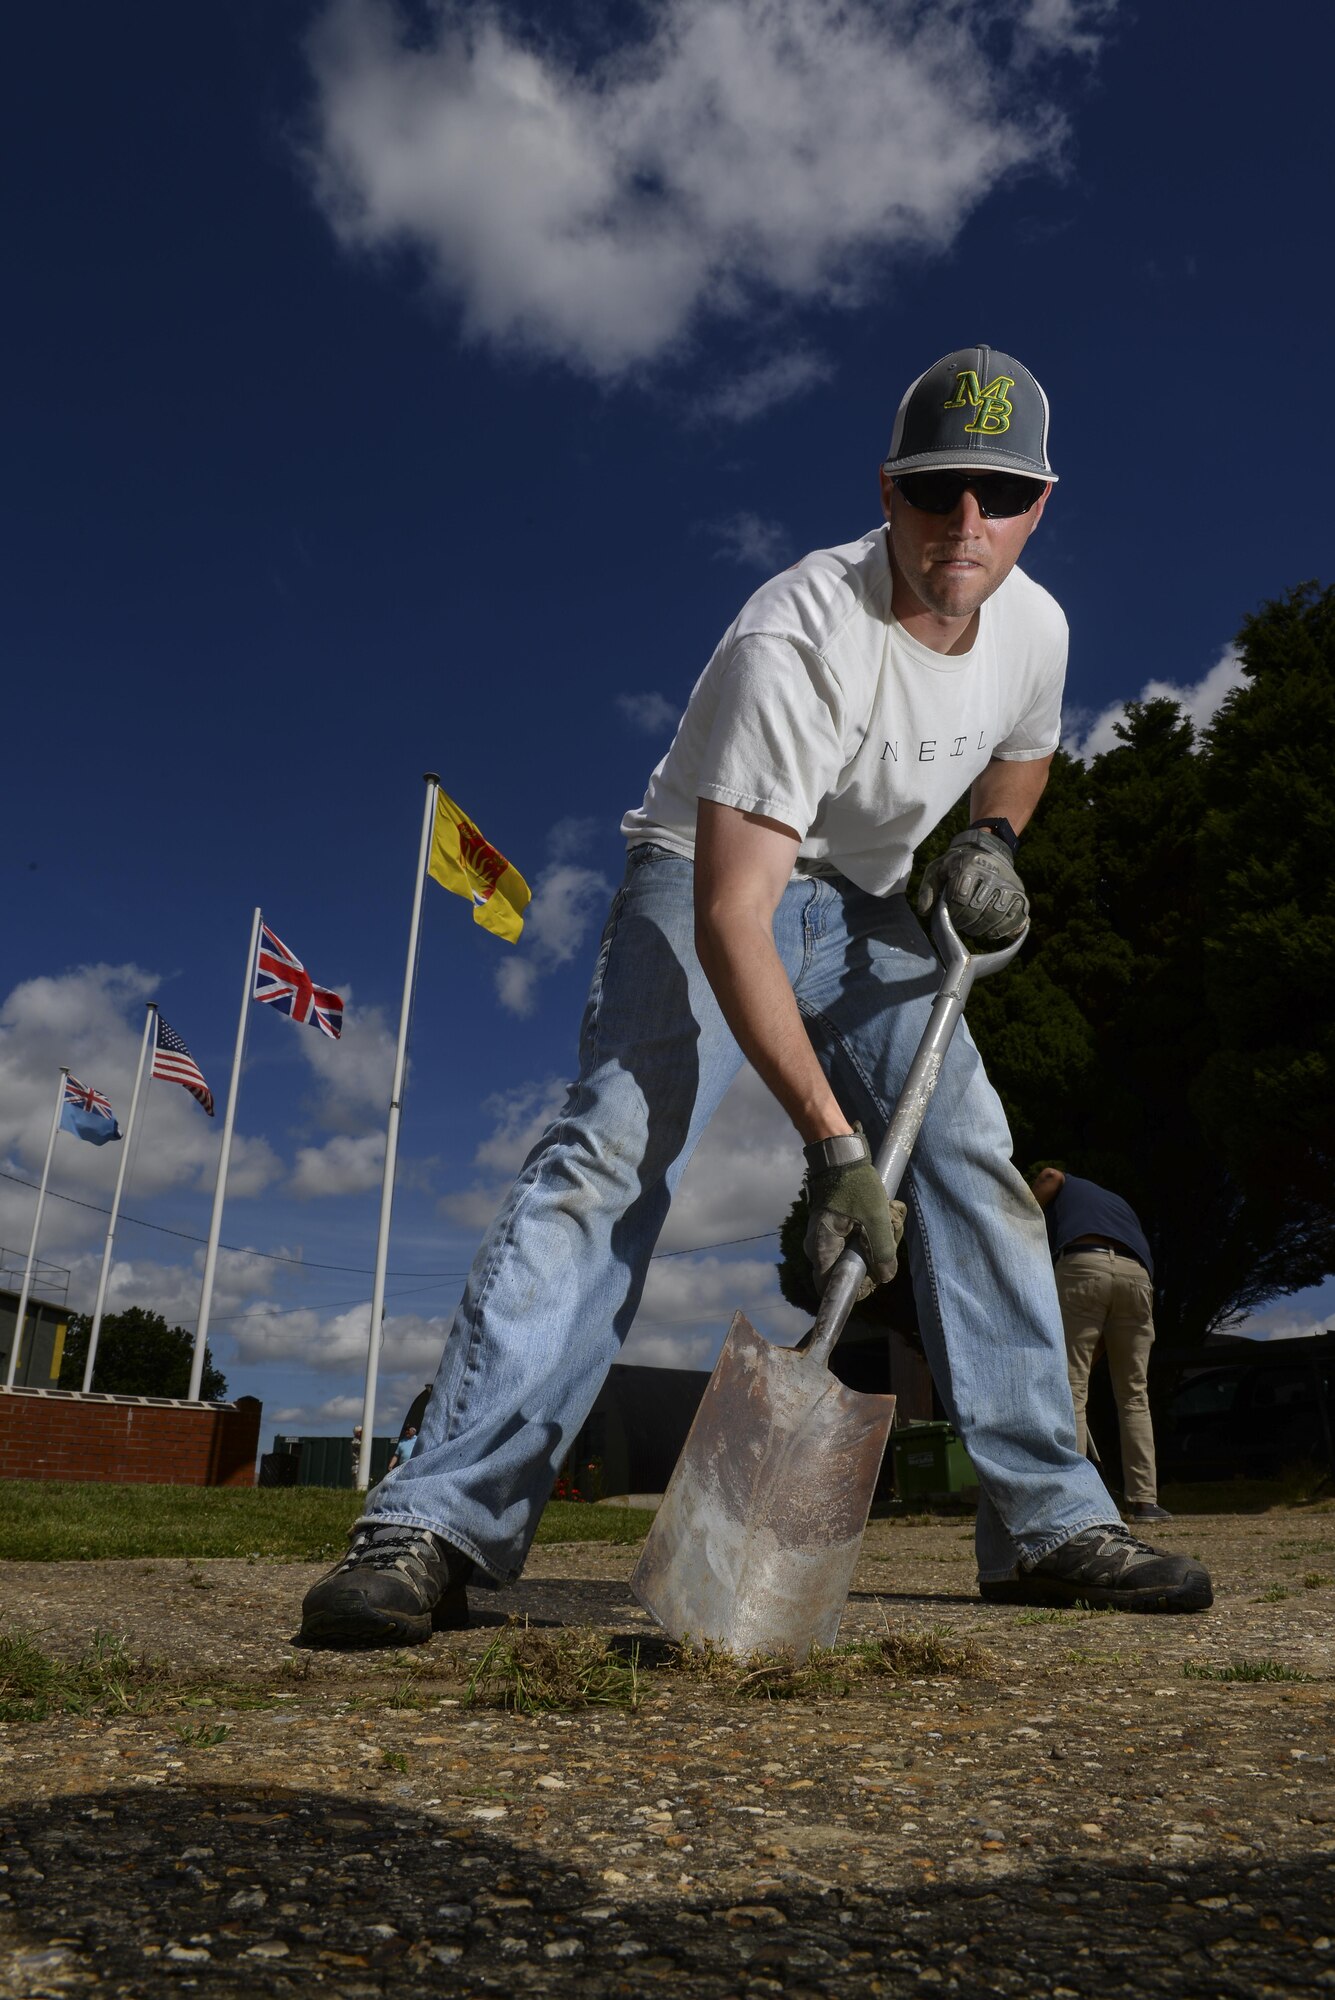 U.S. Air Force Tech. Sgt. David West, 100th Civil Engineer Squadron commander support staff NCO, uses a shovel to remove weeds from a side walk July 17, 2016, at the RAF Rougham Tower Museum in Bury St. Edmunds, England. West and other members from Team Mildenhall’s Air Force Sergeants Association volunteered to clean up the museum. (U.S. Air Force photo by Staff Sgt. Micaiah Anthony)